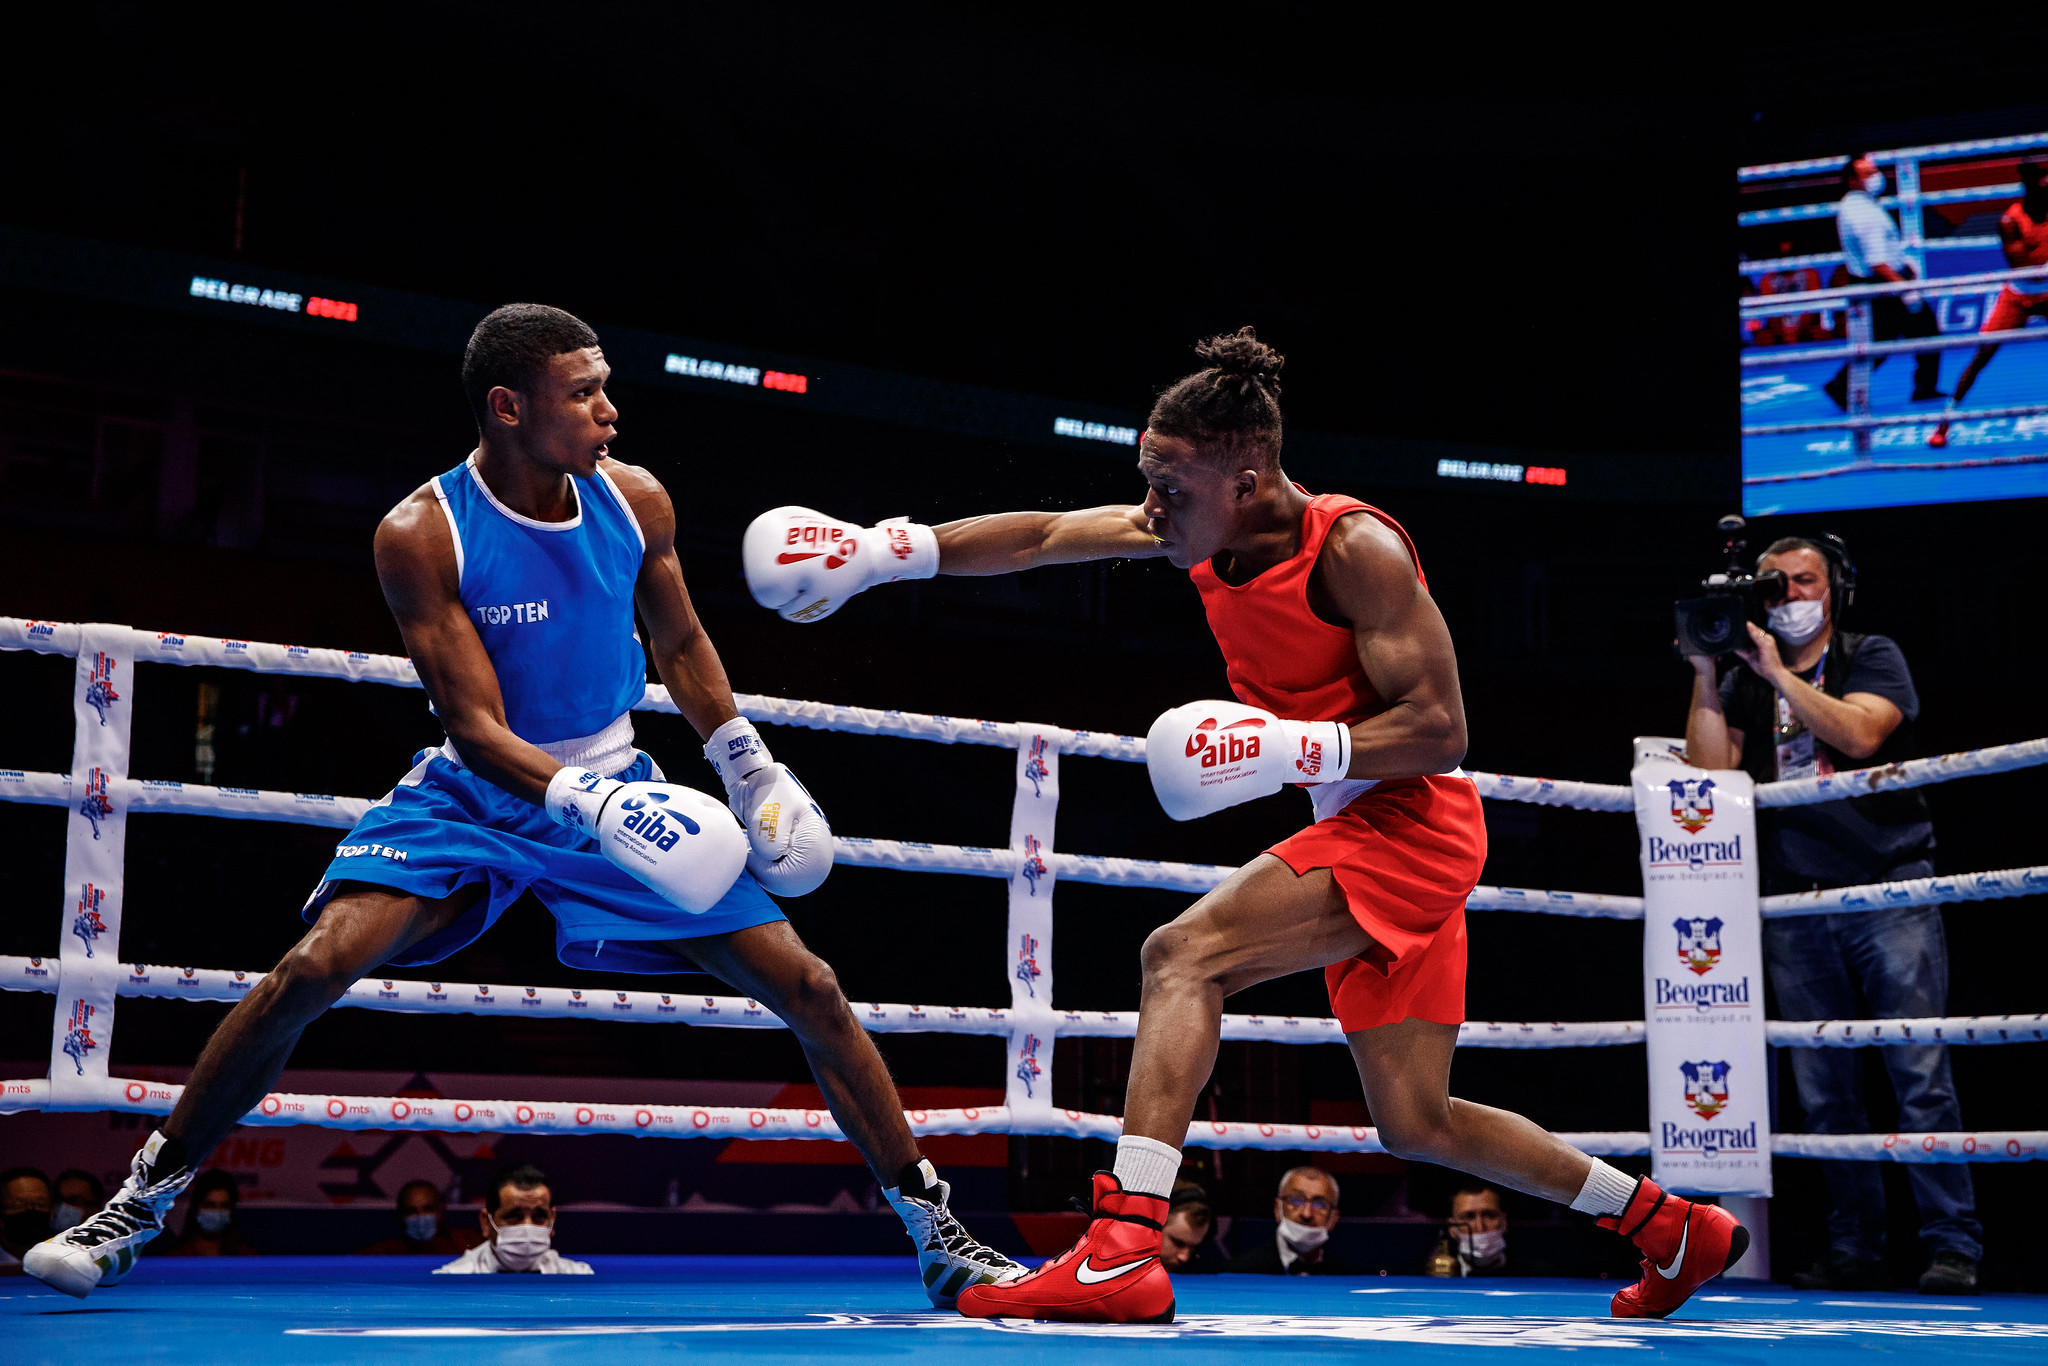 Samuel Kistohurry of France, left, was the master of evasion in his bout with Fawaz Aborode of the Fair Chance Team ©AIBA